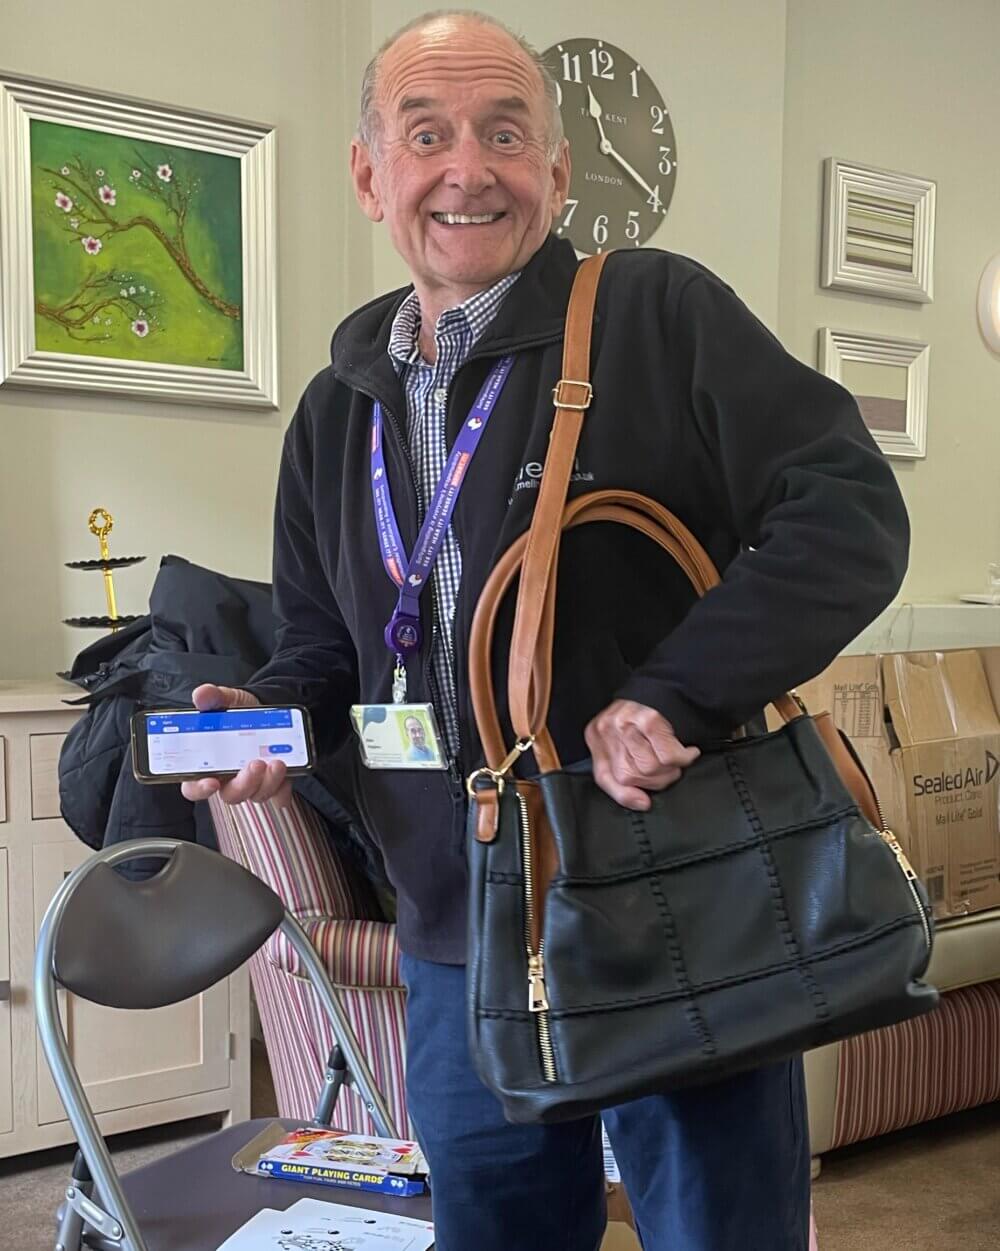 Alan Hughes of Melin Homes wins a special prize on the Easter raffle.